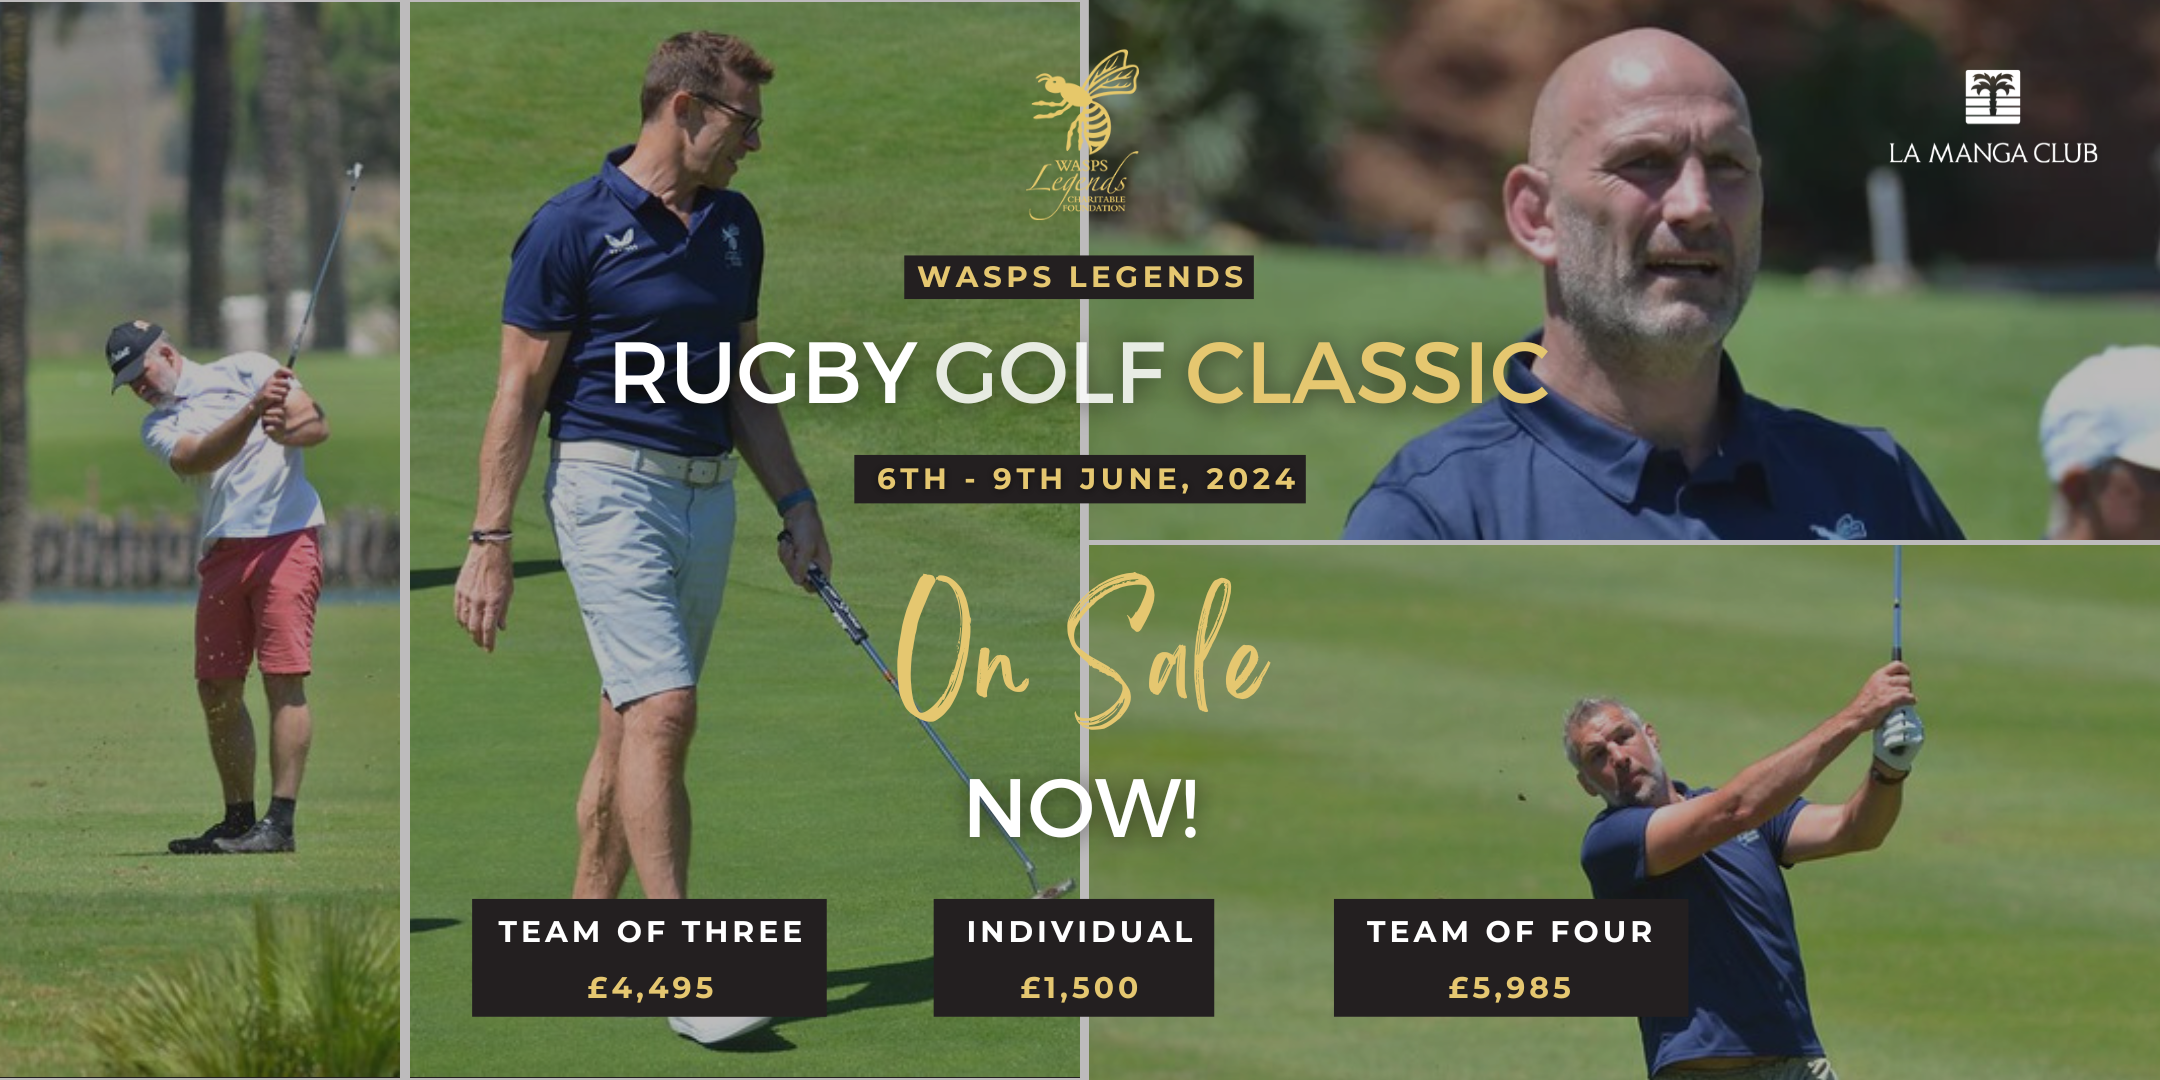 Wasps Legends Rugby Golf Classic 2024 Flyer 